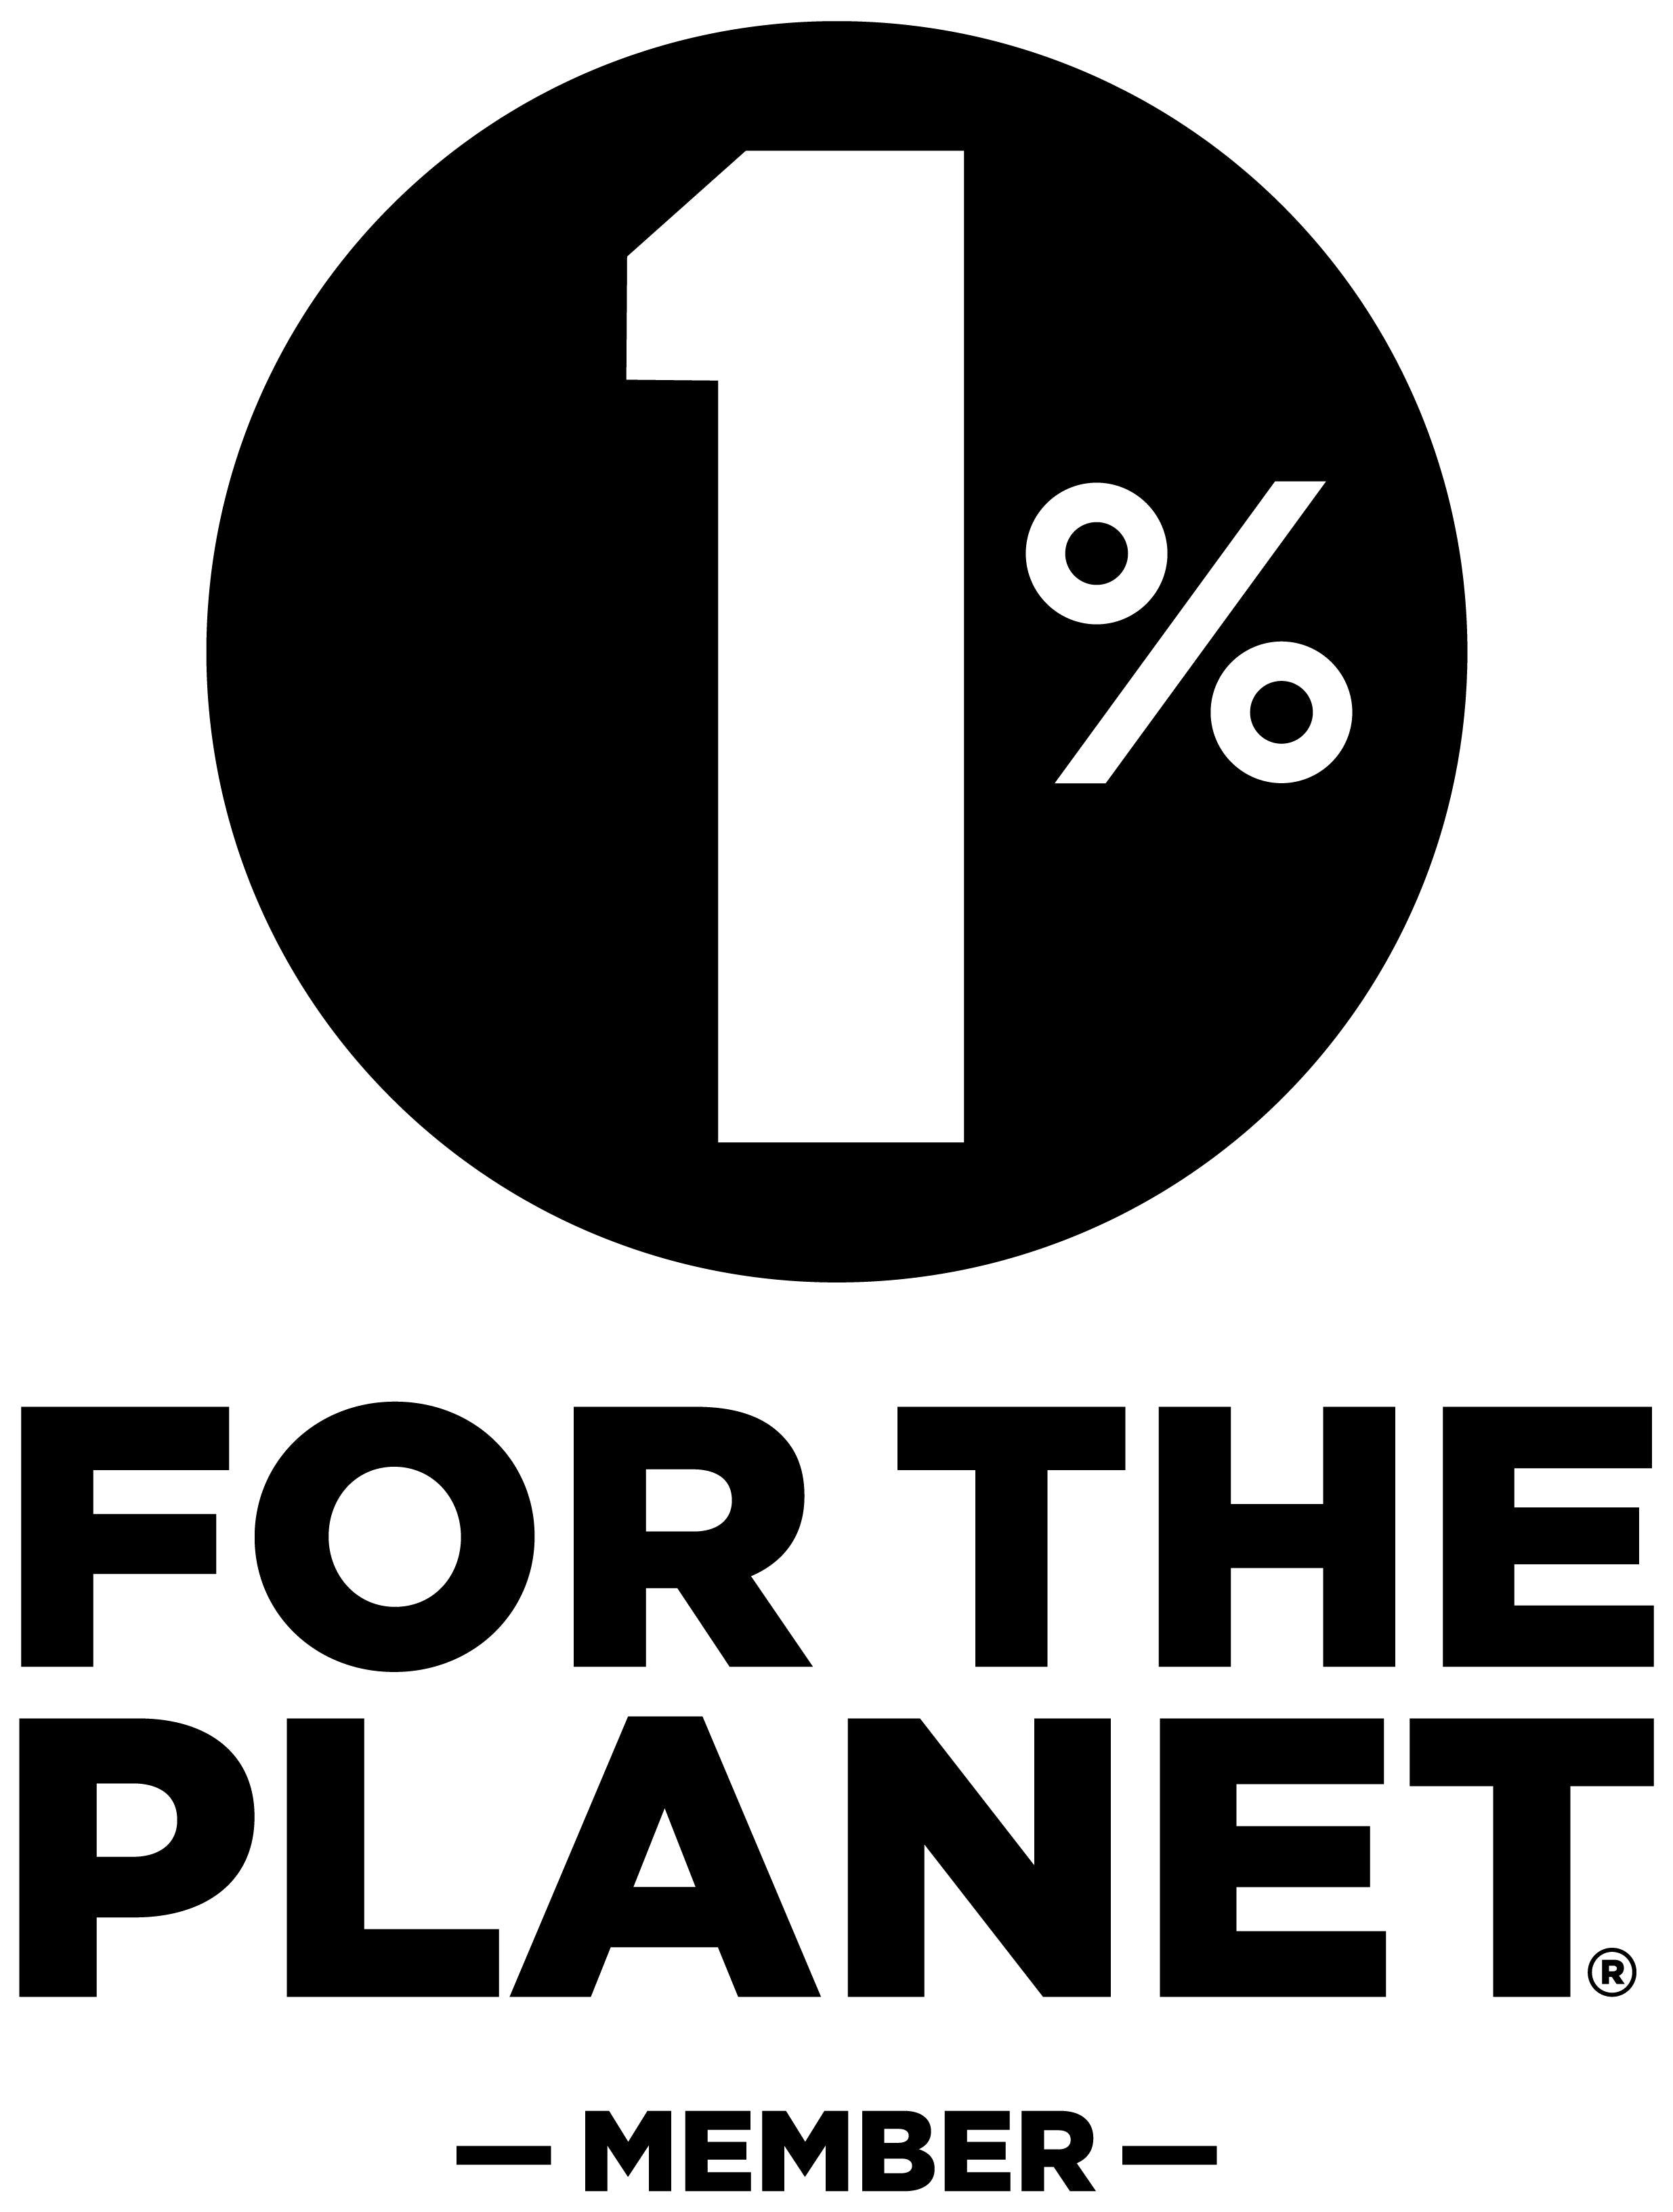 1% for the Planet award